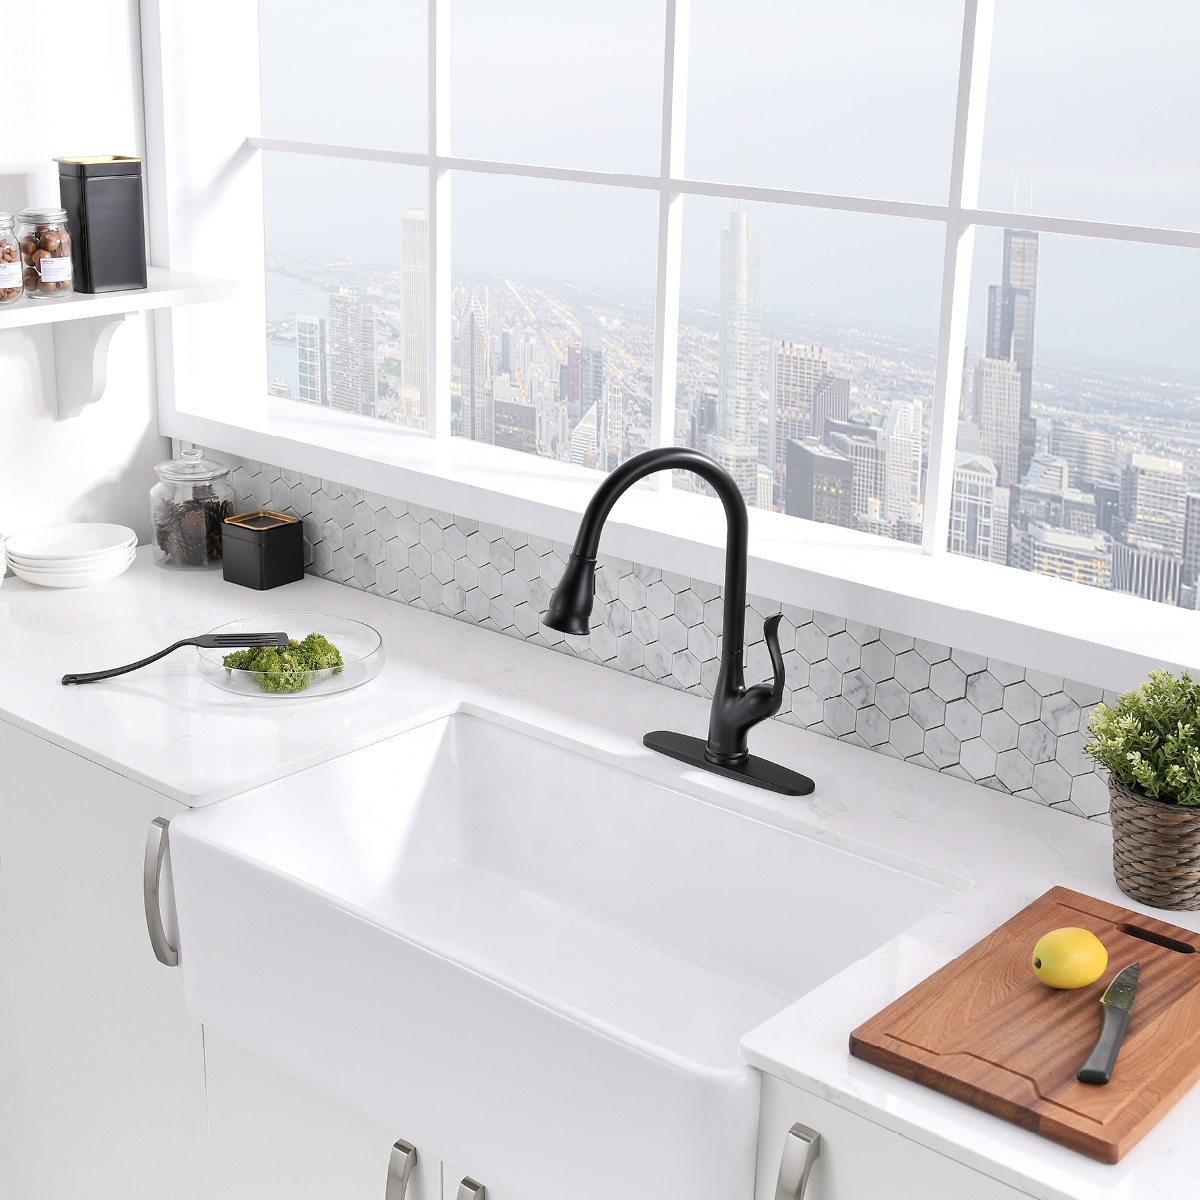 Kitchen Faucet Tap Vintage Kitchen Mixer Faucet Sink Faucet With Pull Down Sprayer